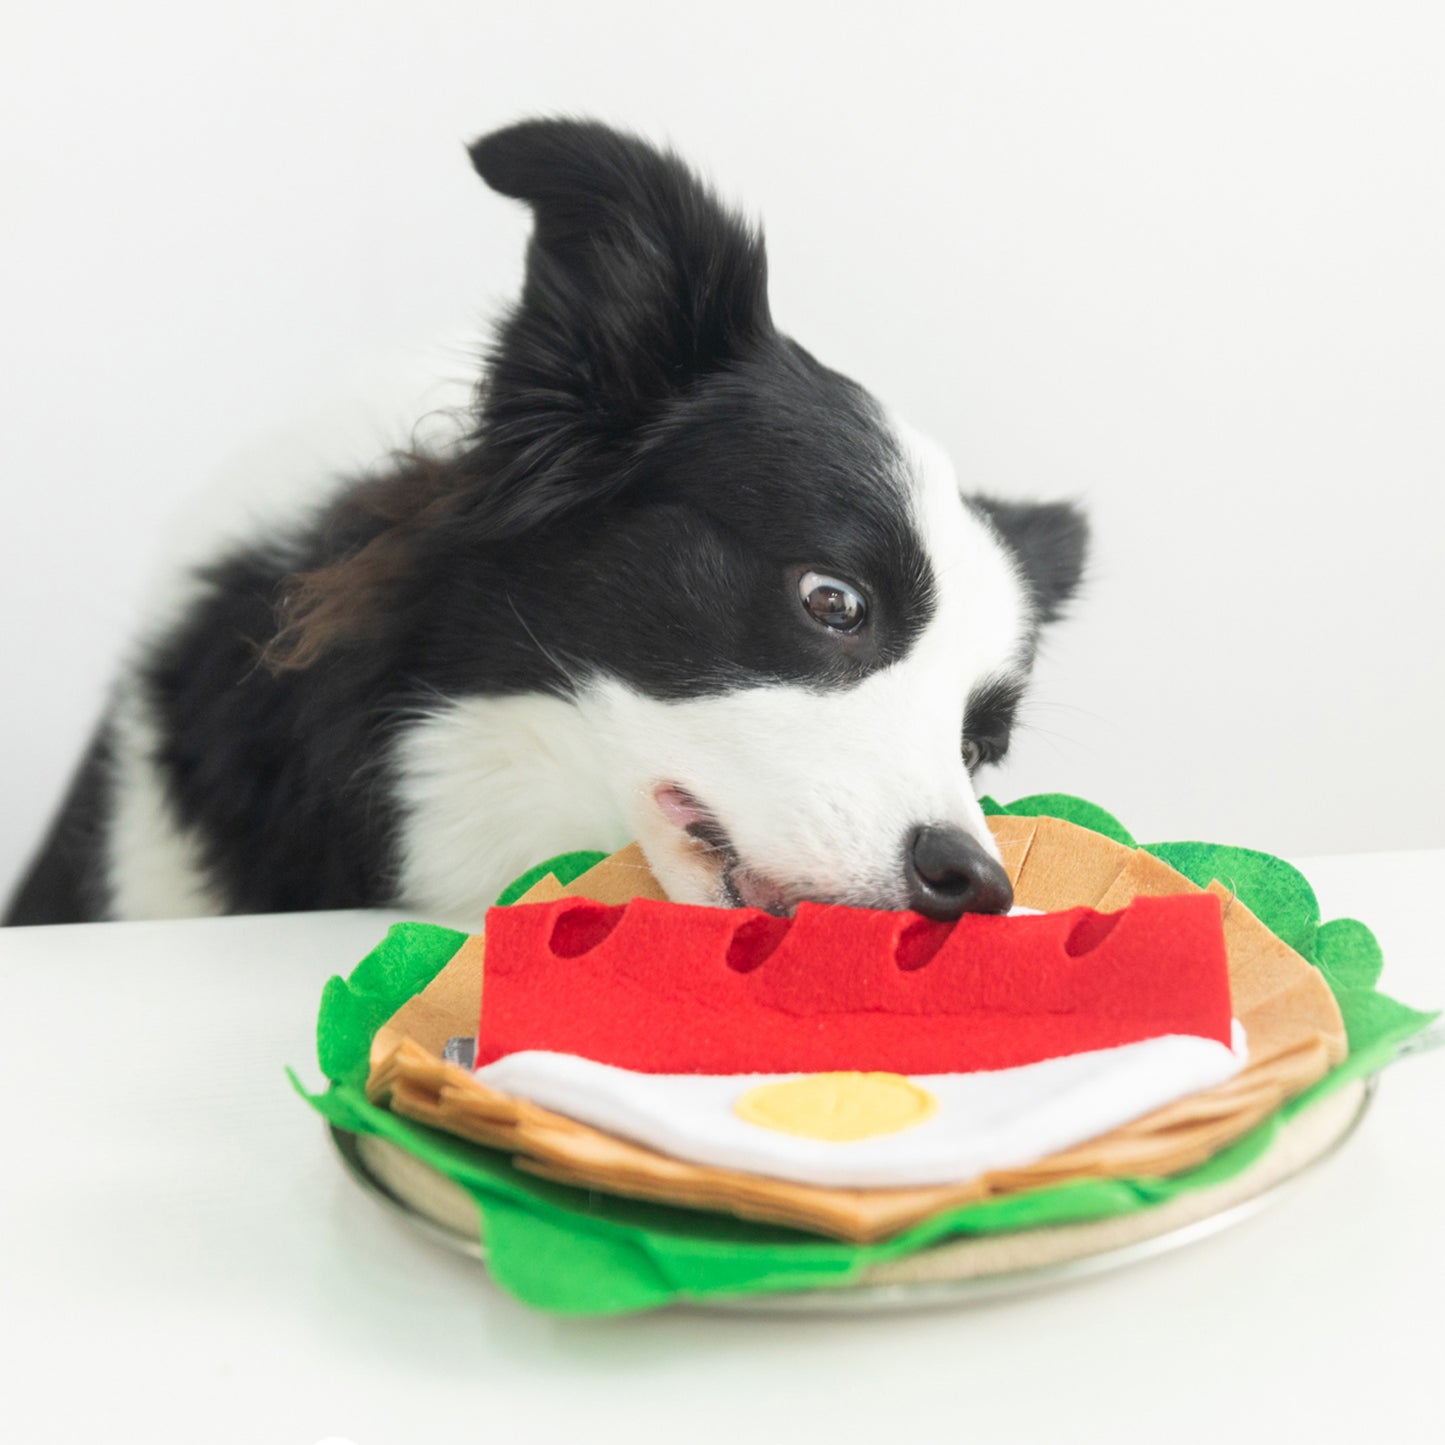 Smiley Breakfast Plate Snuffle Dog Toy